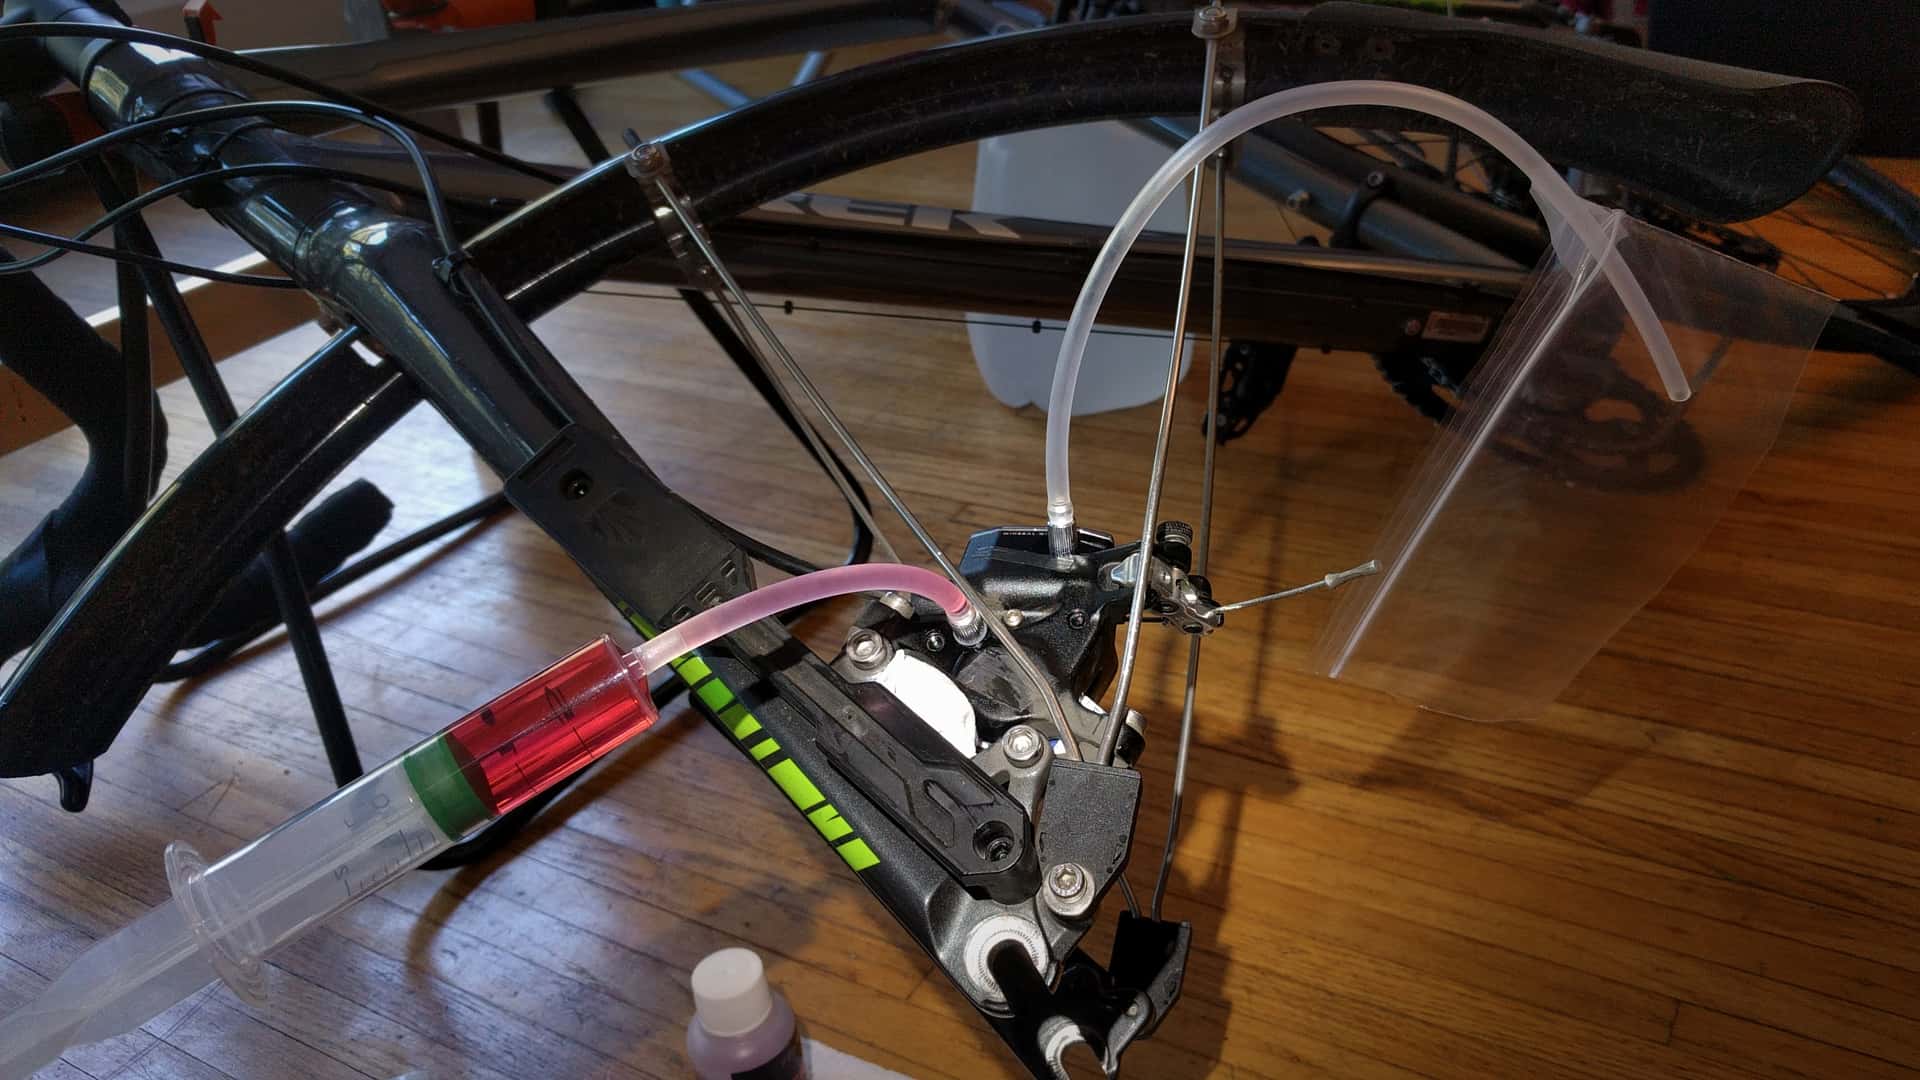 syringe purging air bubbles from a hydraulic disk brake